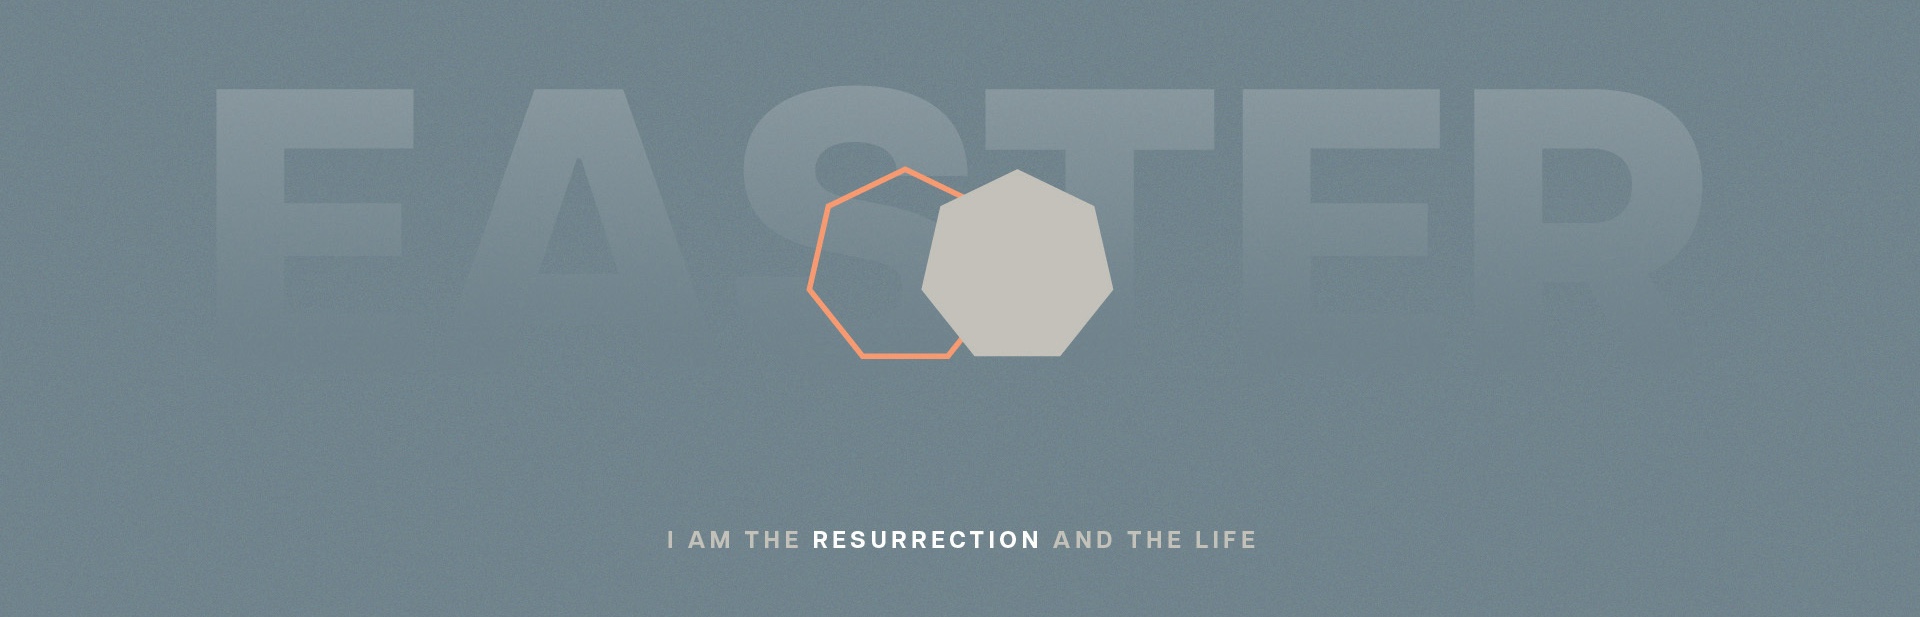 Easter at The Summit Church - I am the resurrection and life